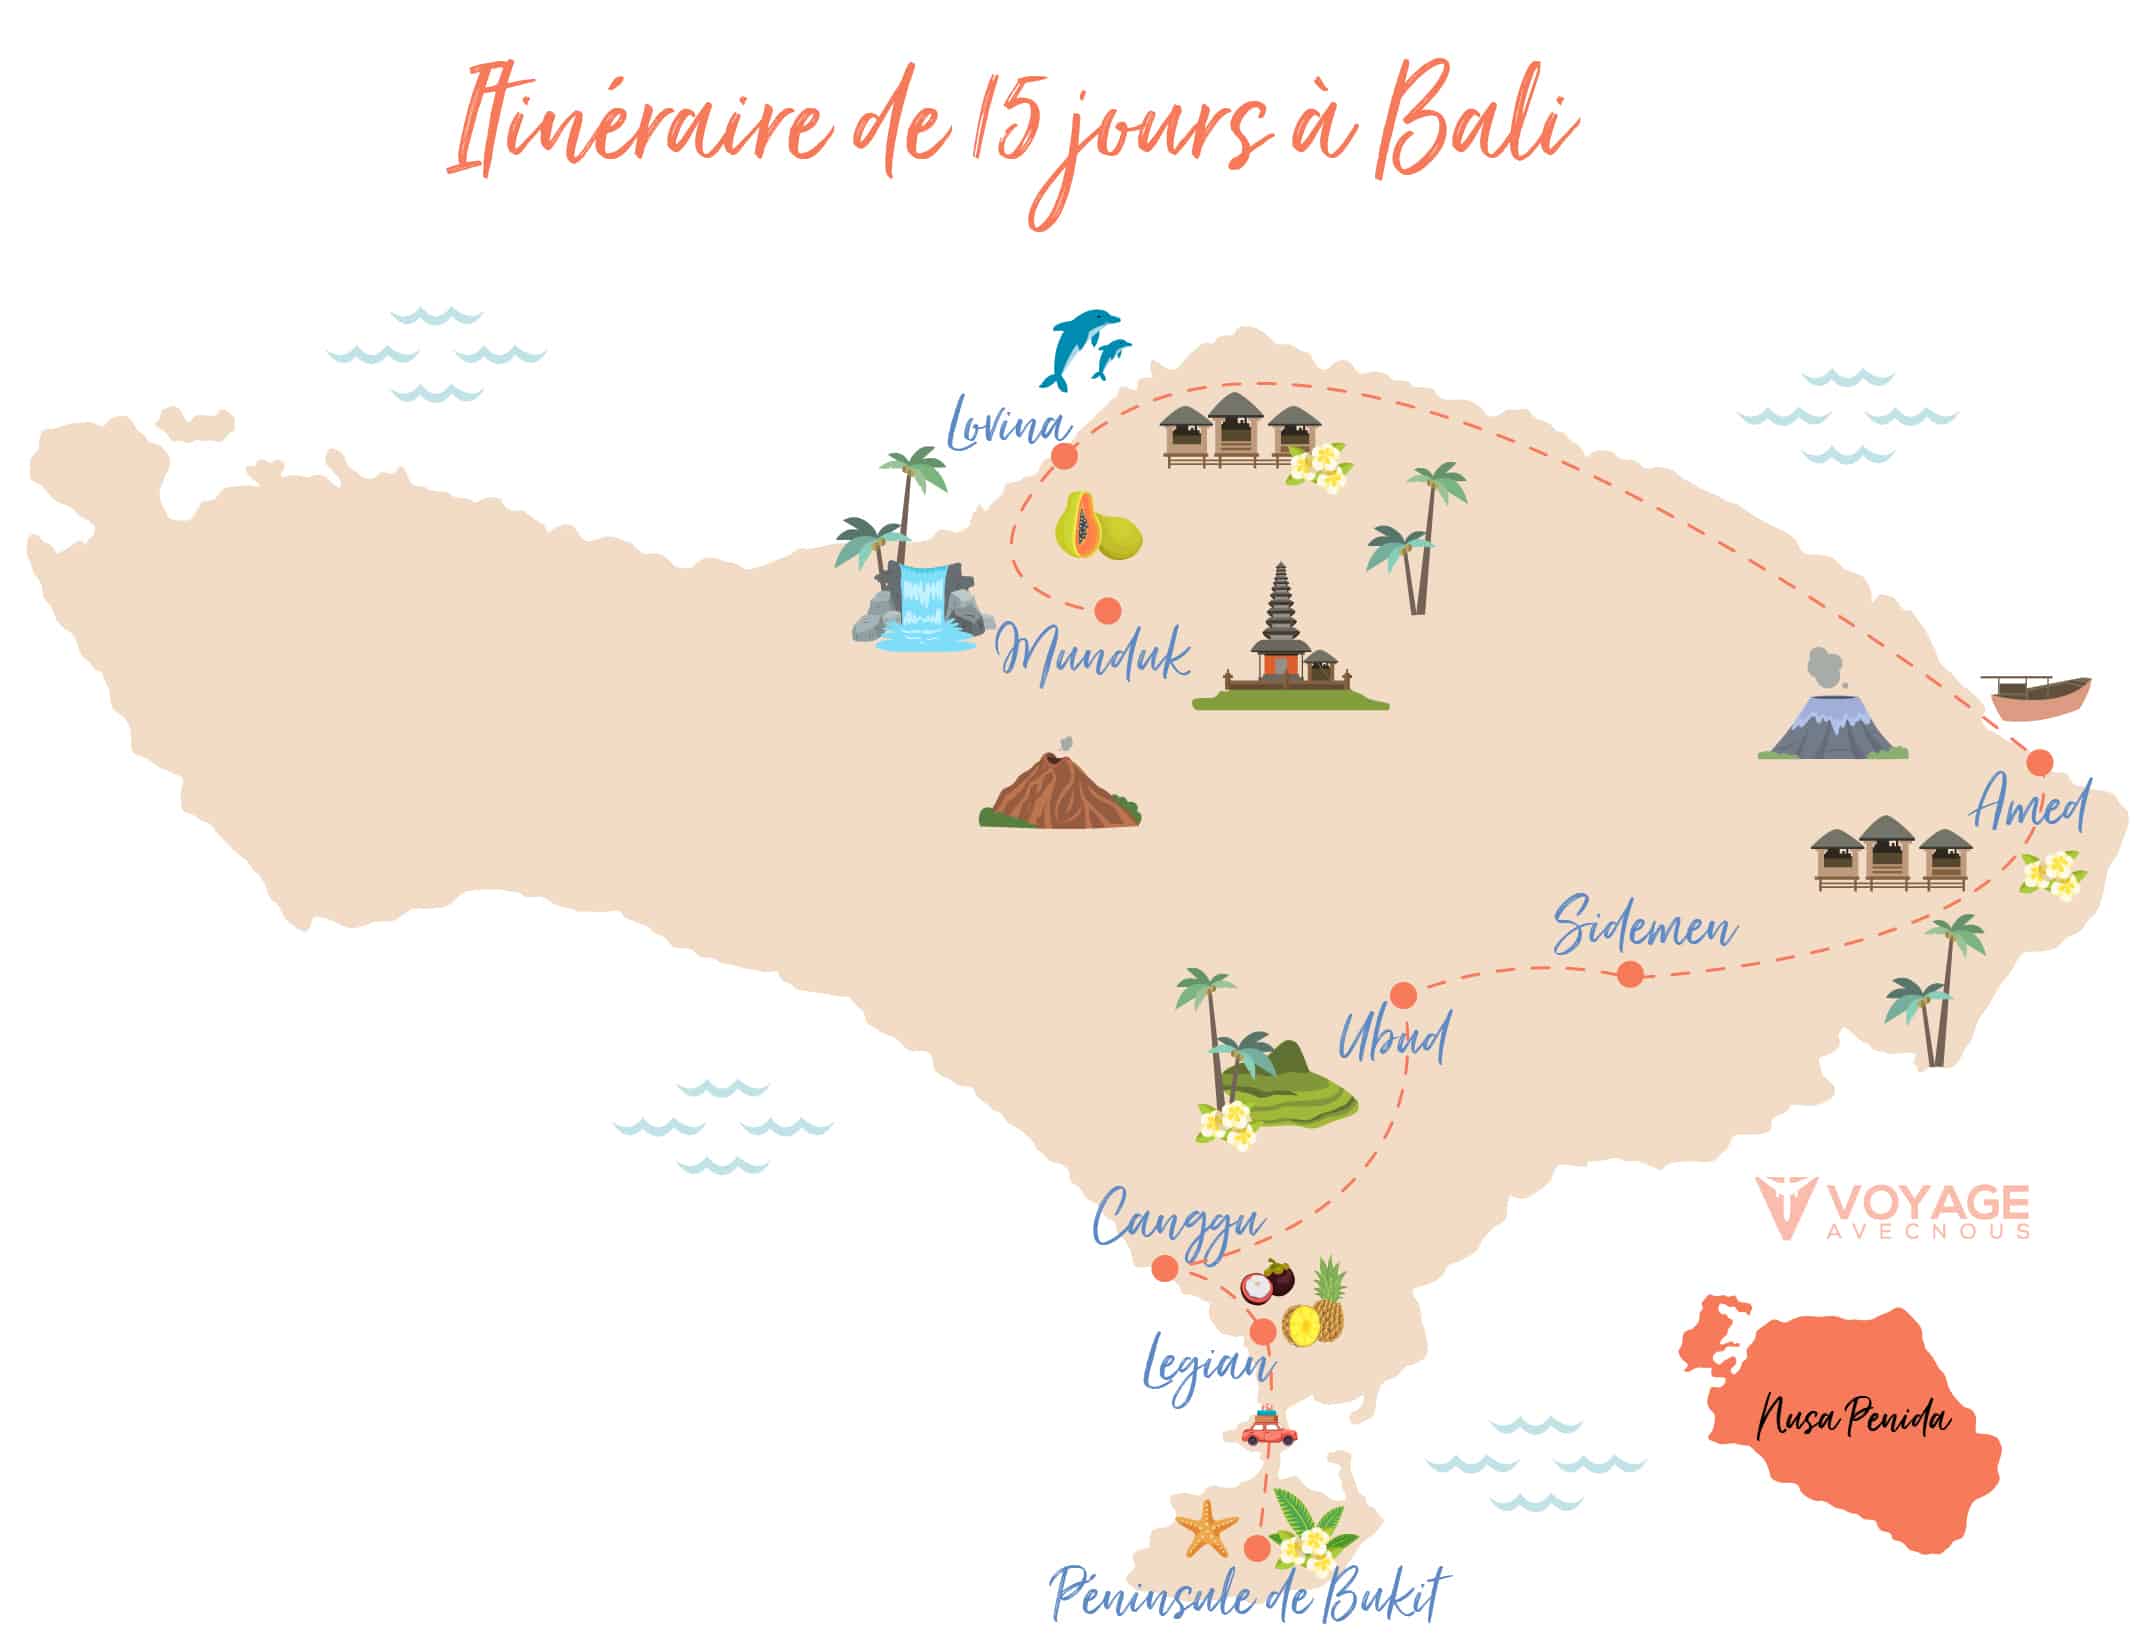 itineraire bali 15 jours